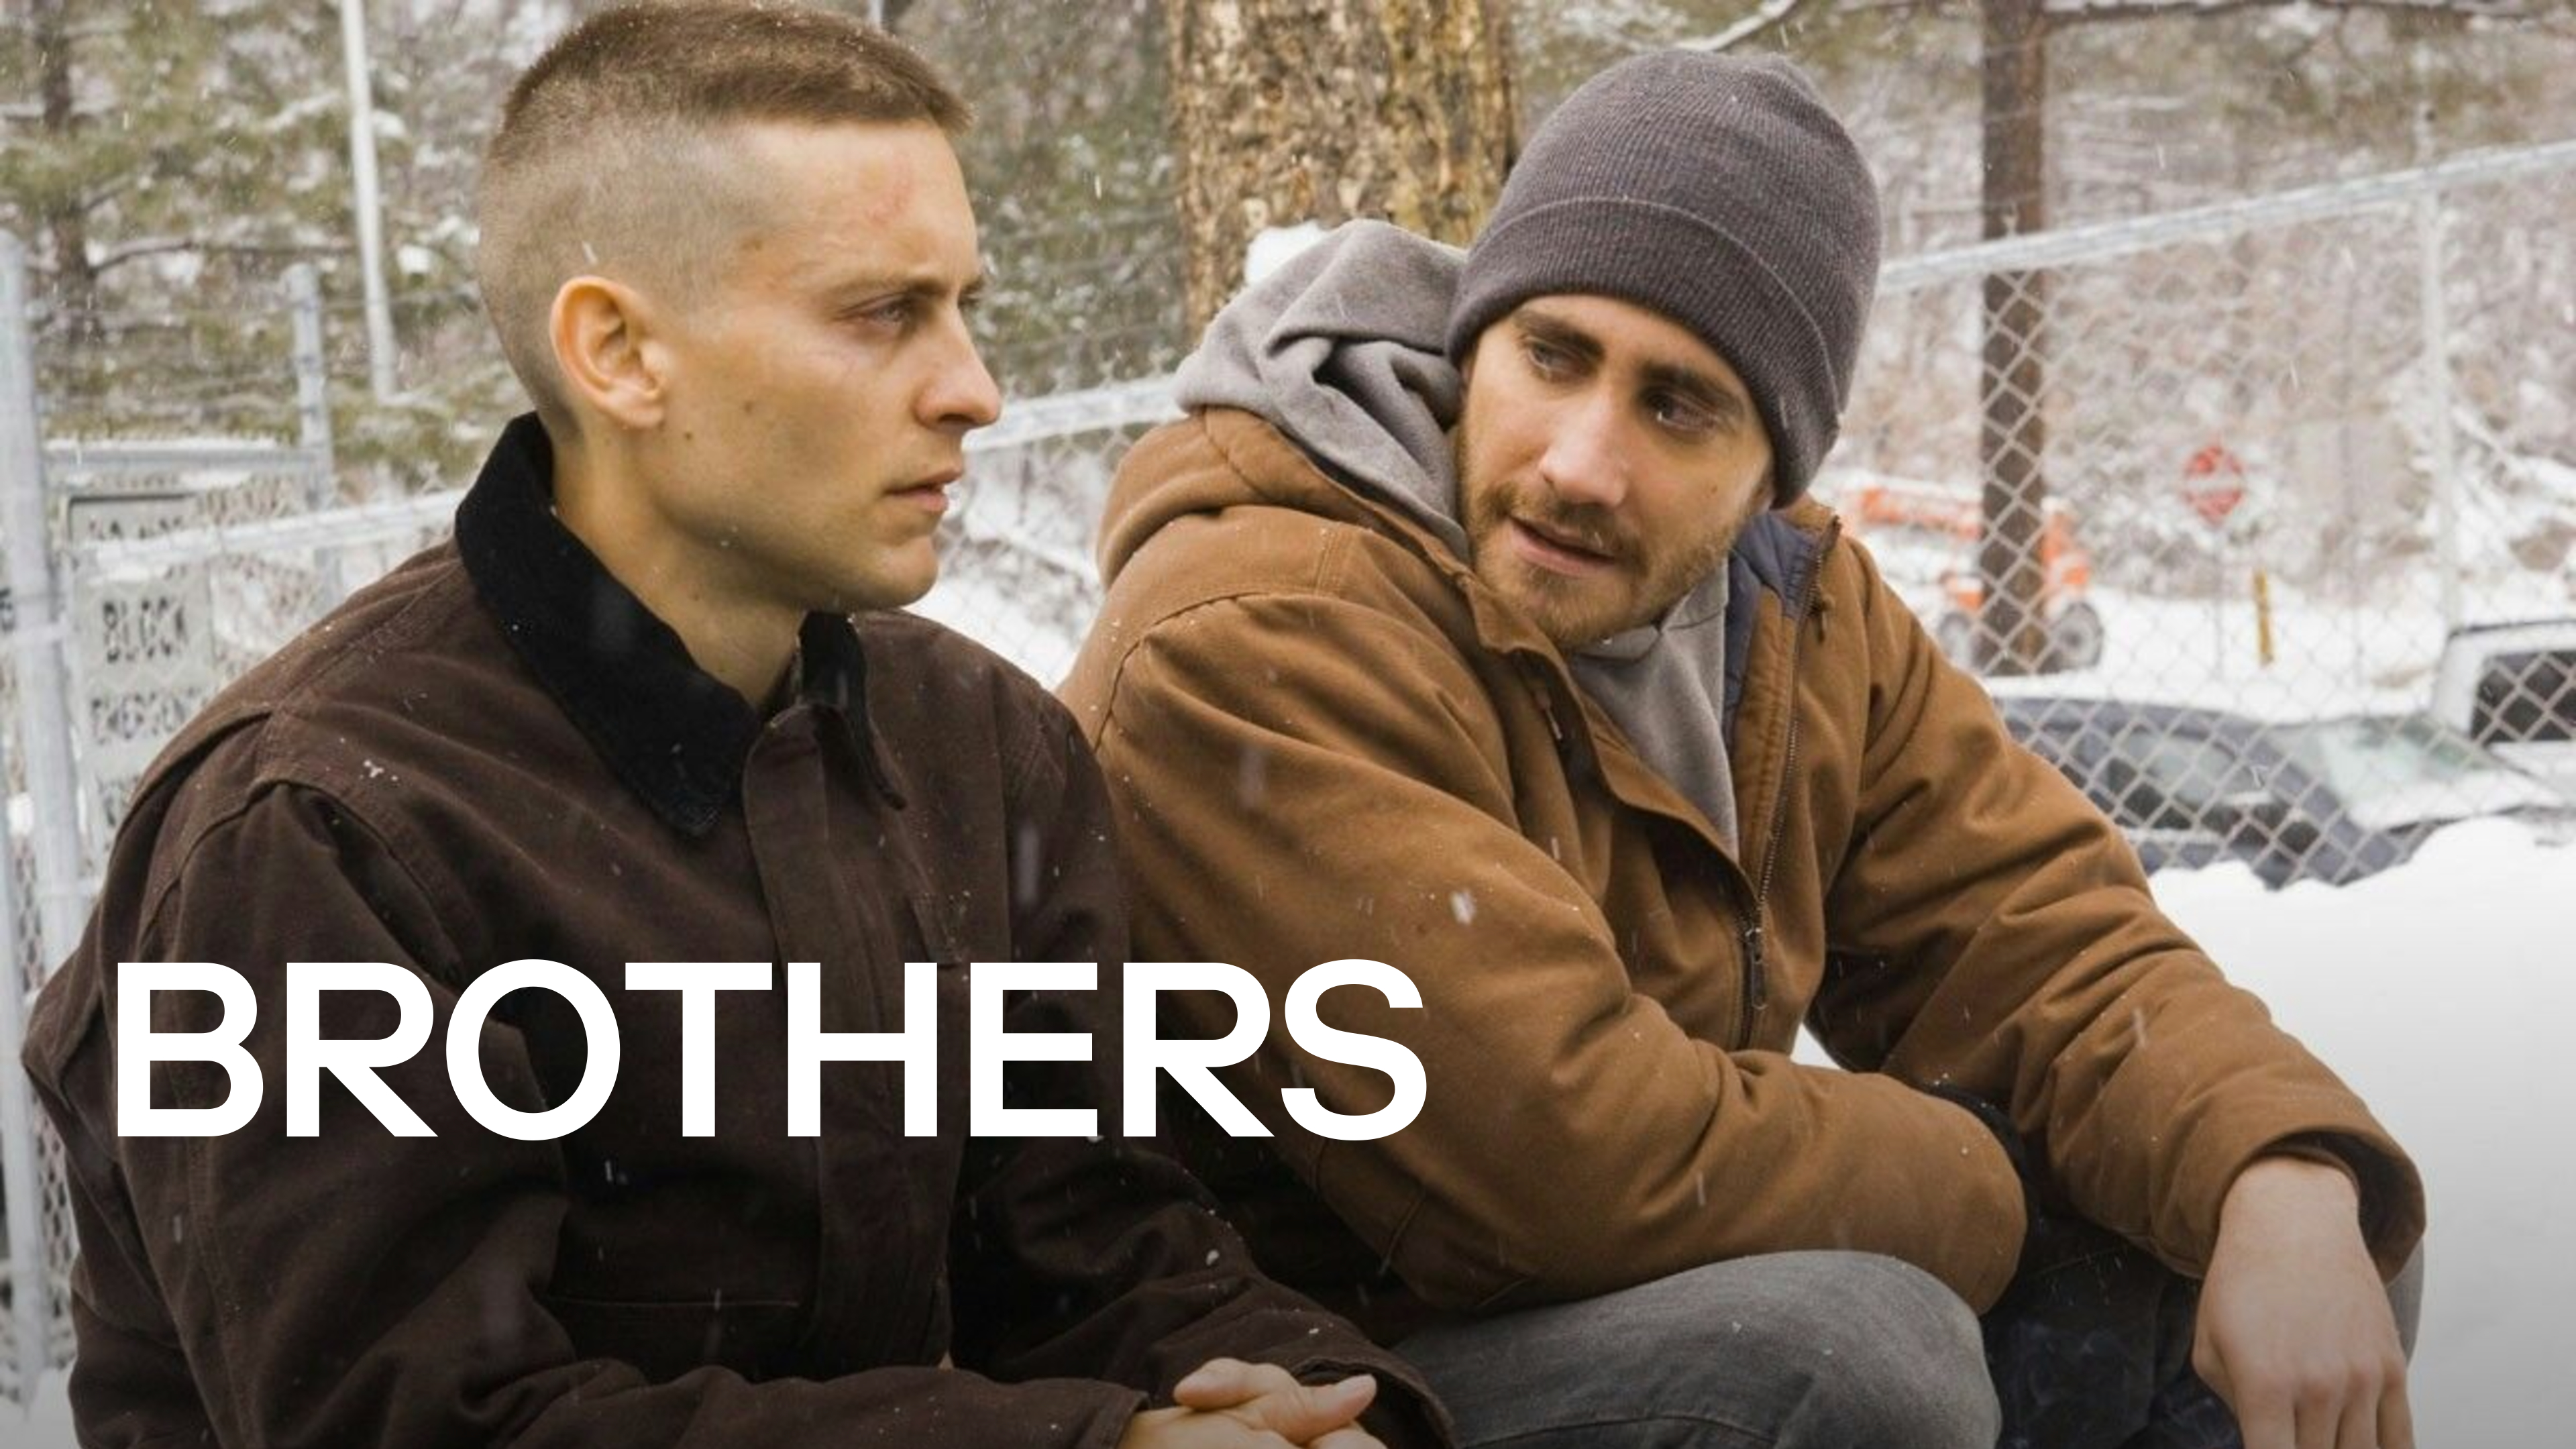 Brothers - Brothers (2009)